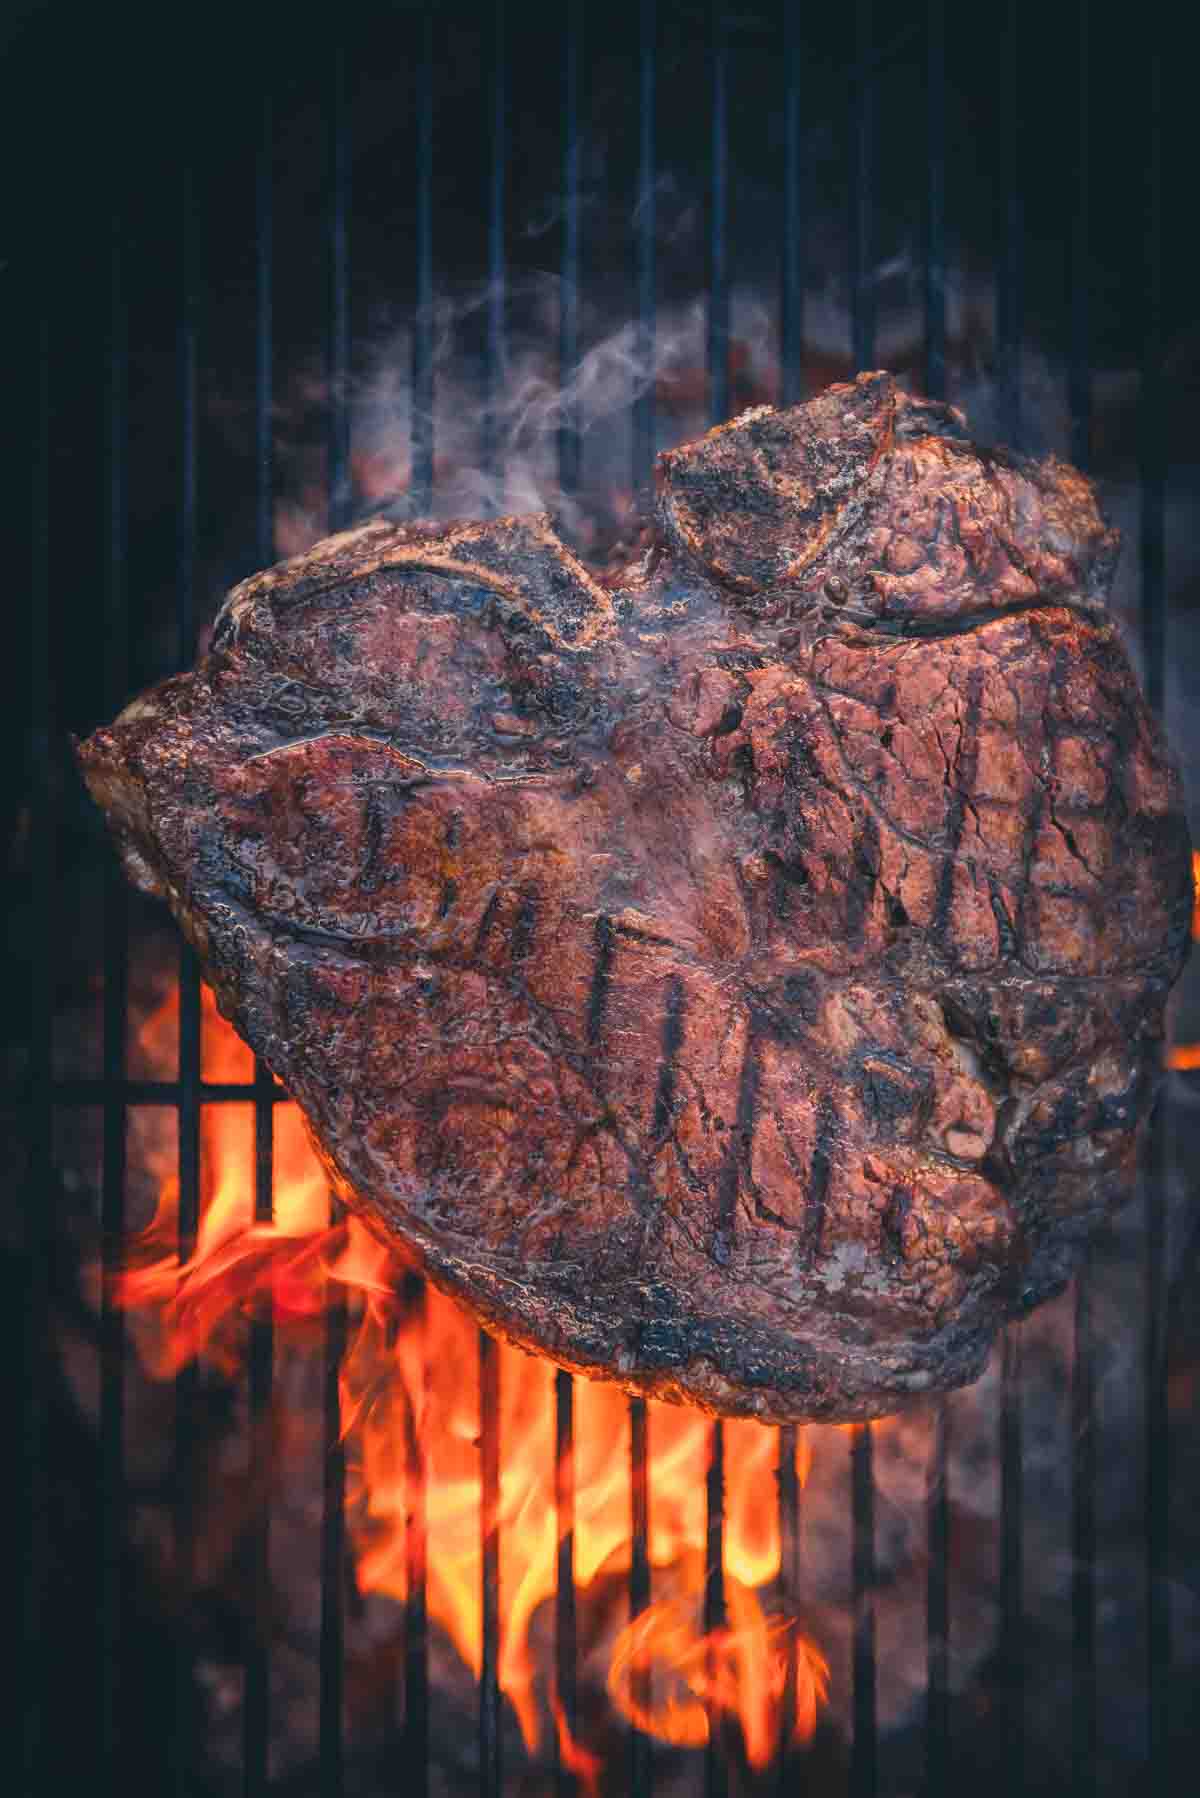 Overhead of porterhouse steak over flames showing grill marks.